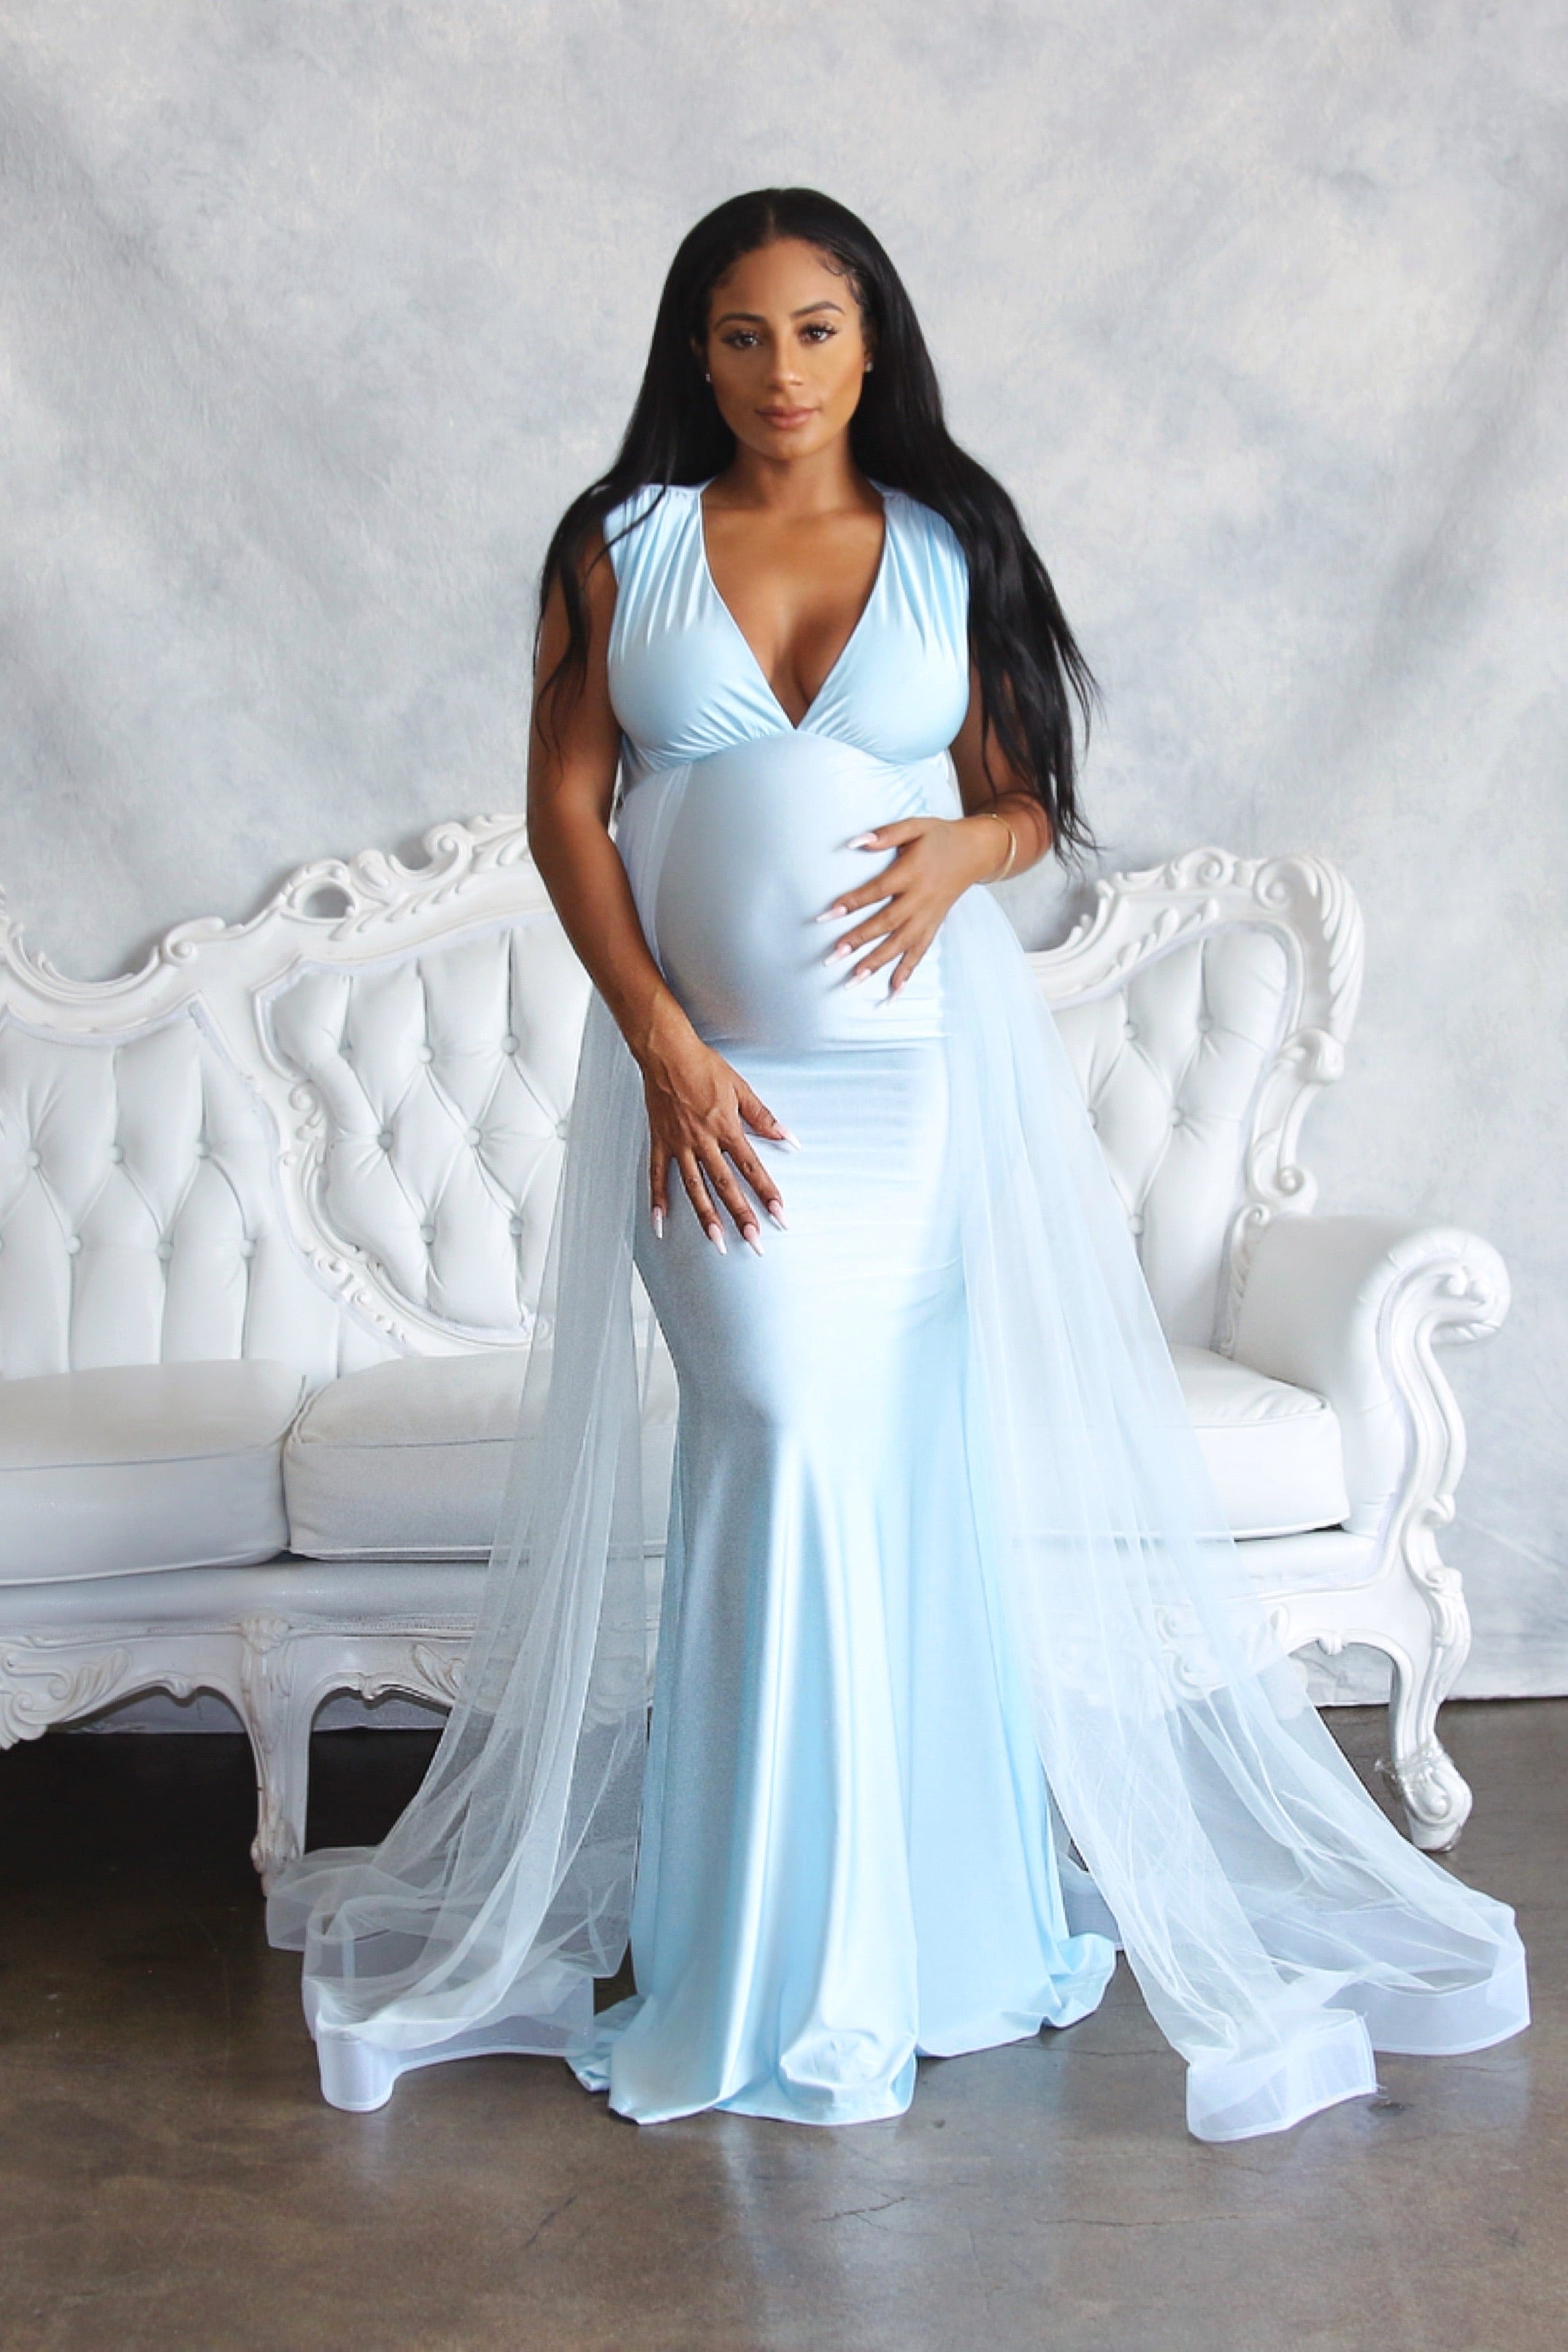 Pin by Lexus Williams on Baby shower | Maternity dresses for baby shower, Baby  shower dresses, Shower outfits